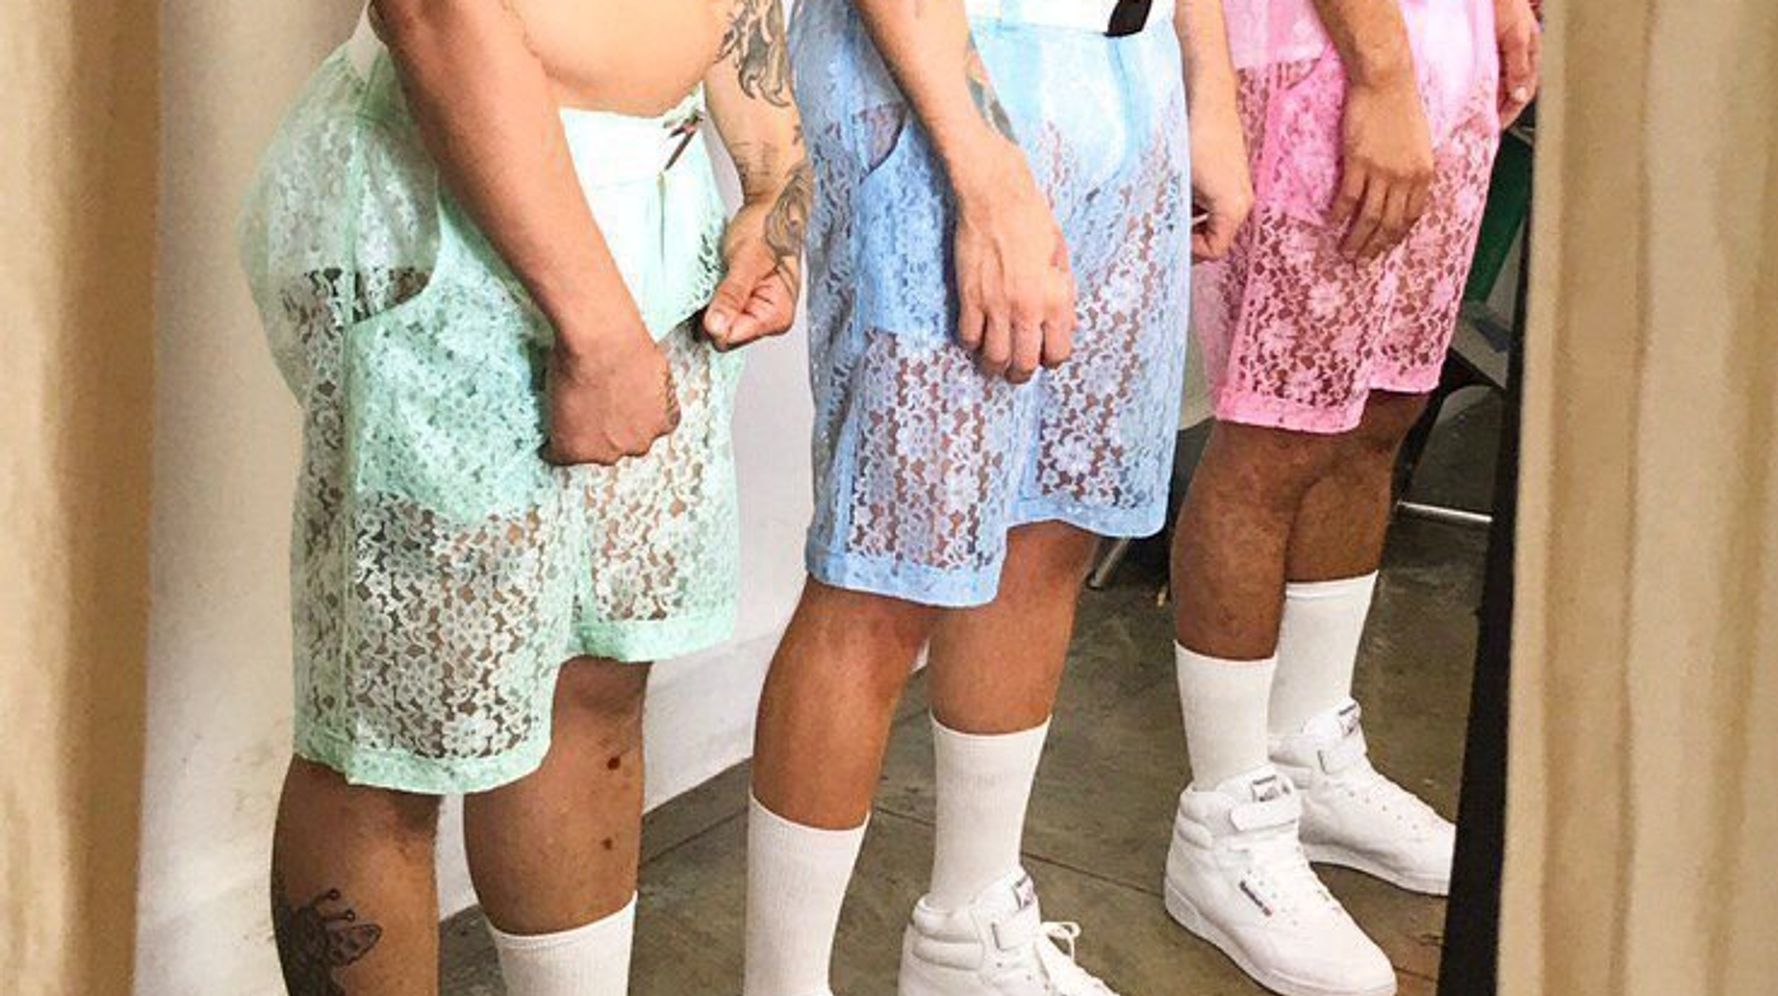 These Lace Shorts For Men Are Coming For The RompHim